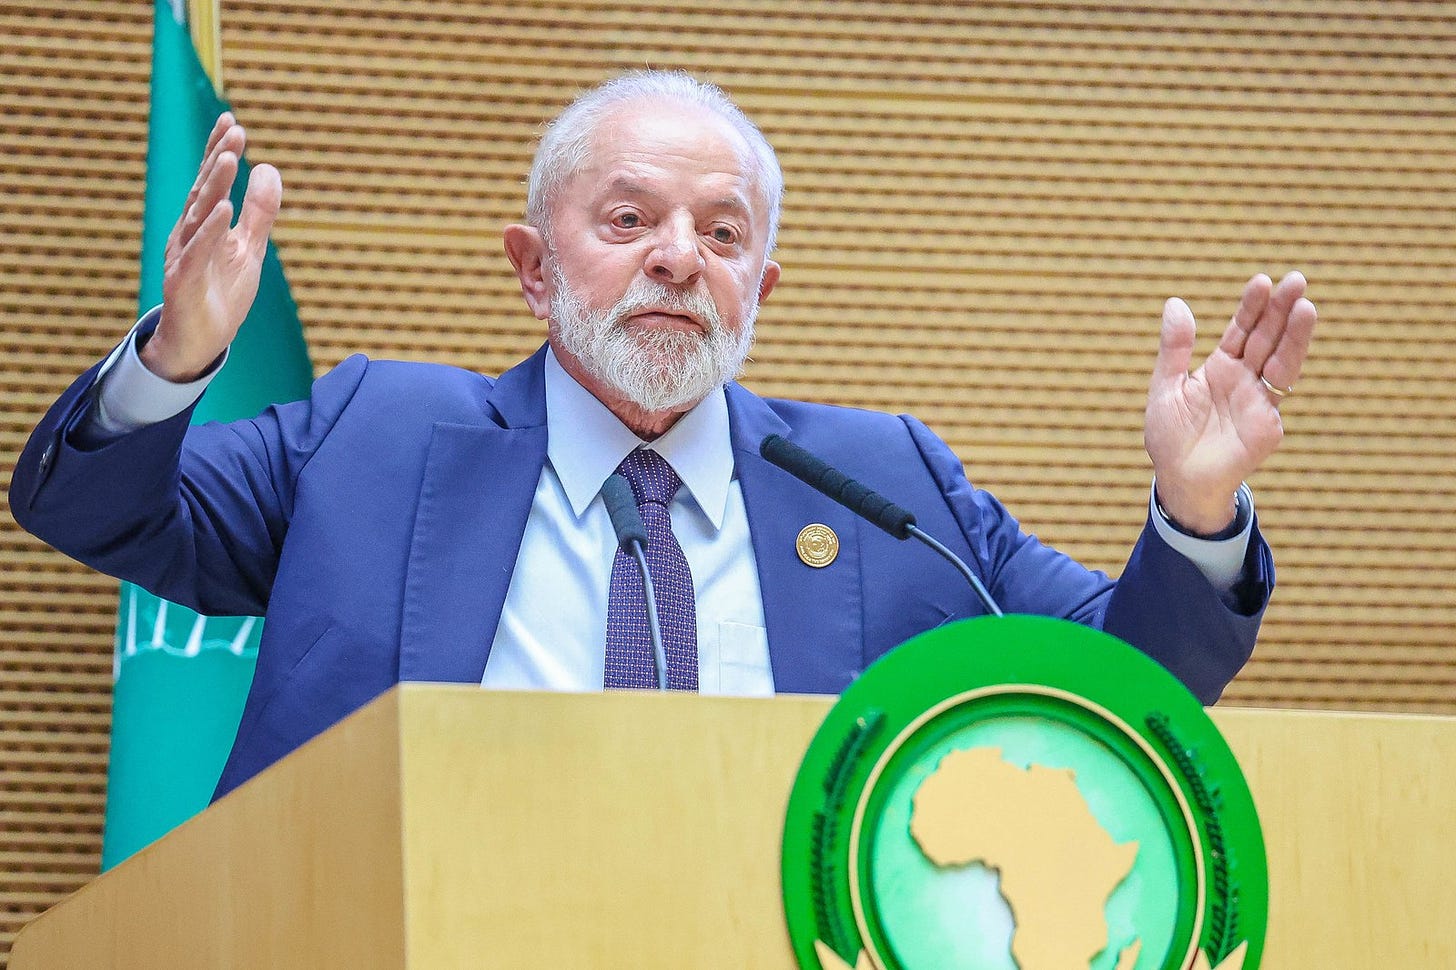 President Lula speaks during the opening of the 37th African Union Summit in Ethiopia | Photo: Ricardo Stuckert / PR